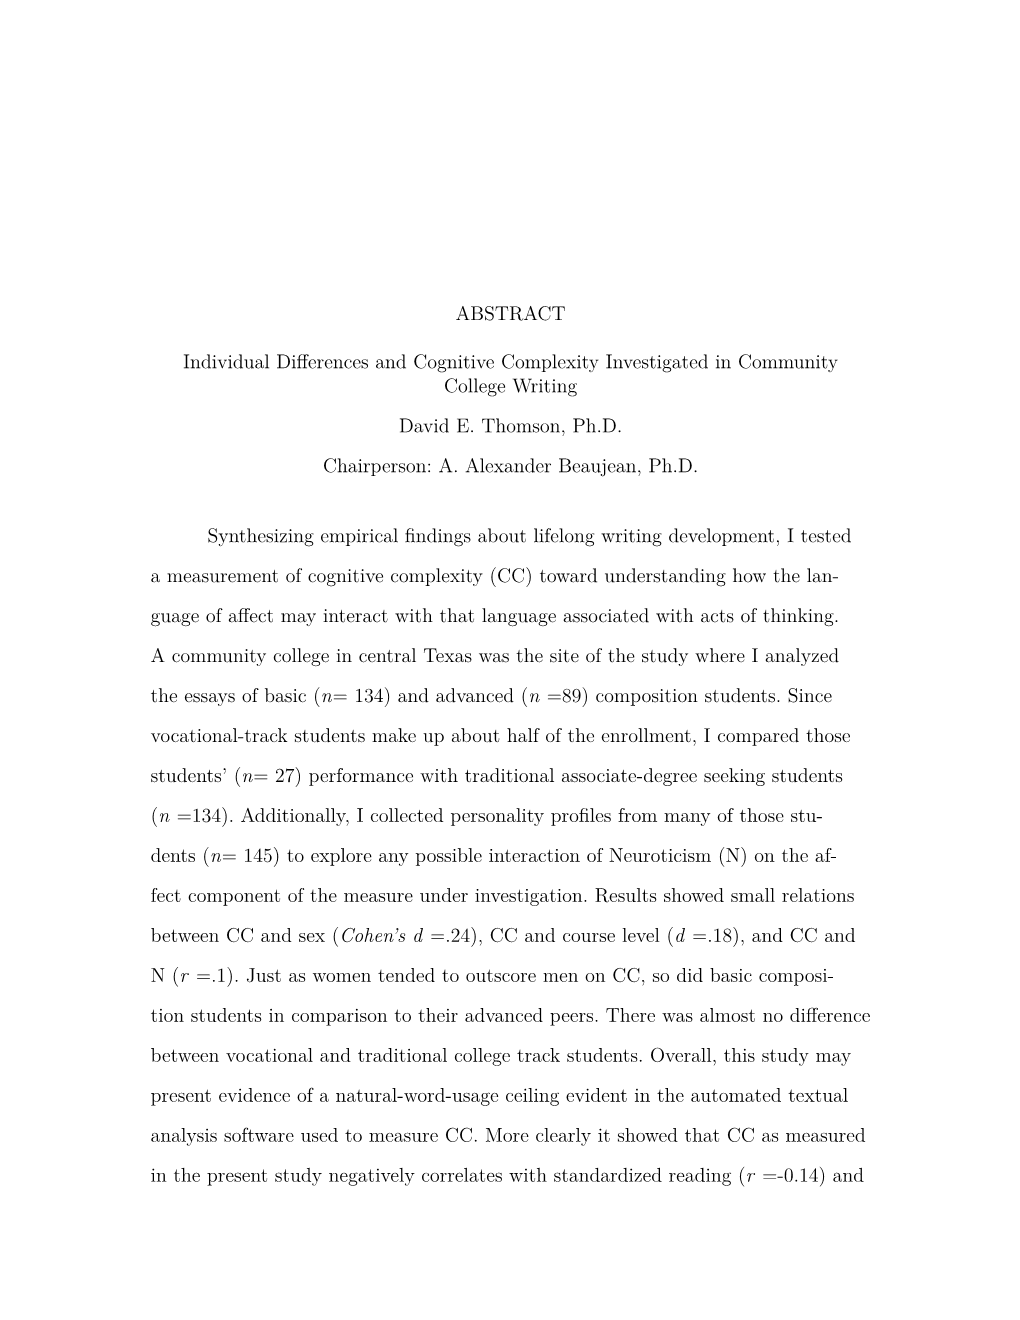 ABSTRACT Individual Differences and Cognitive Complexity Investigated in Community College Writing David E. Thomson, Ph.D. Chair